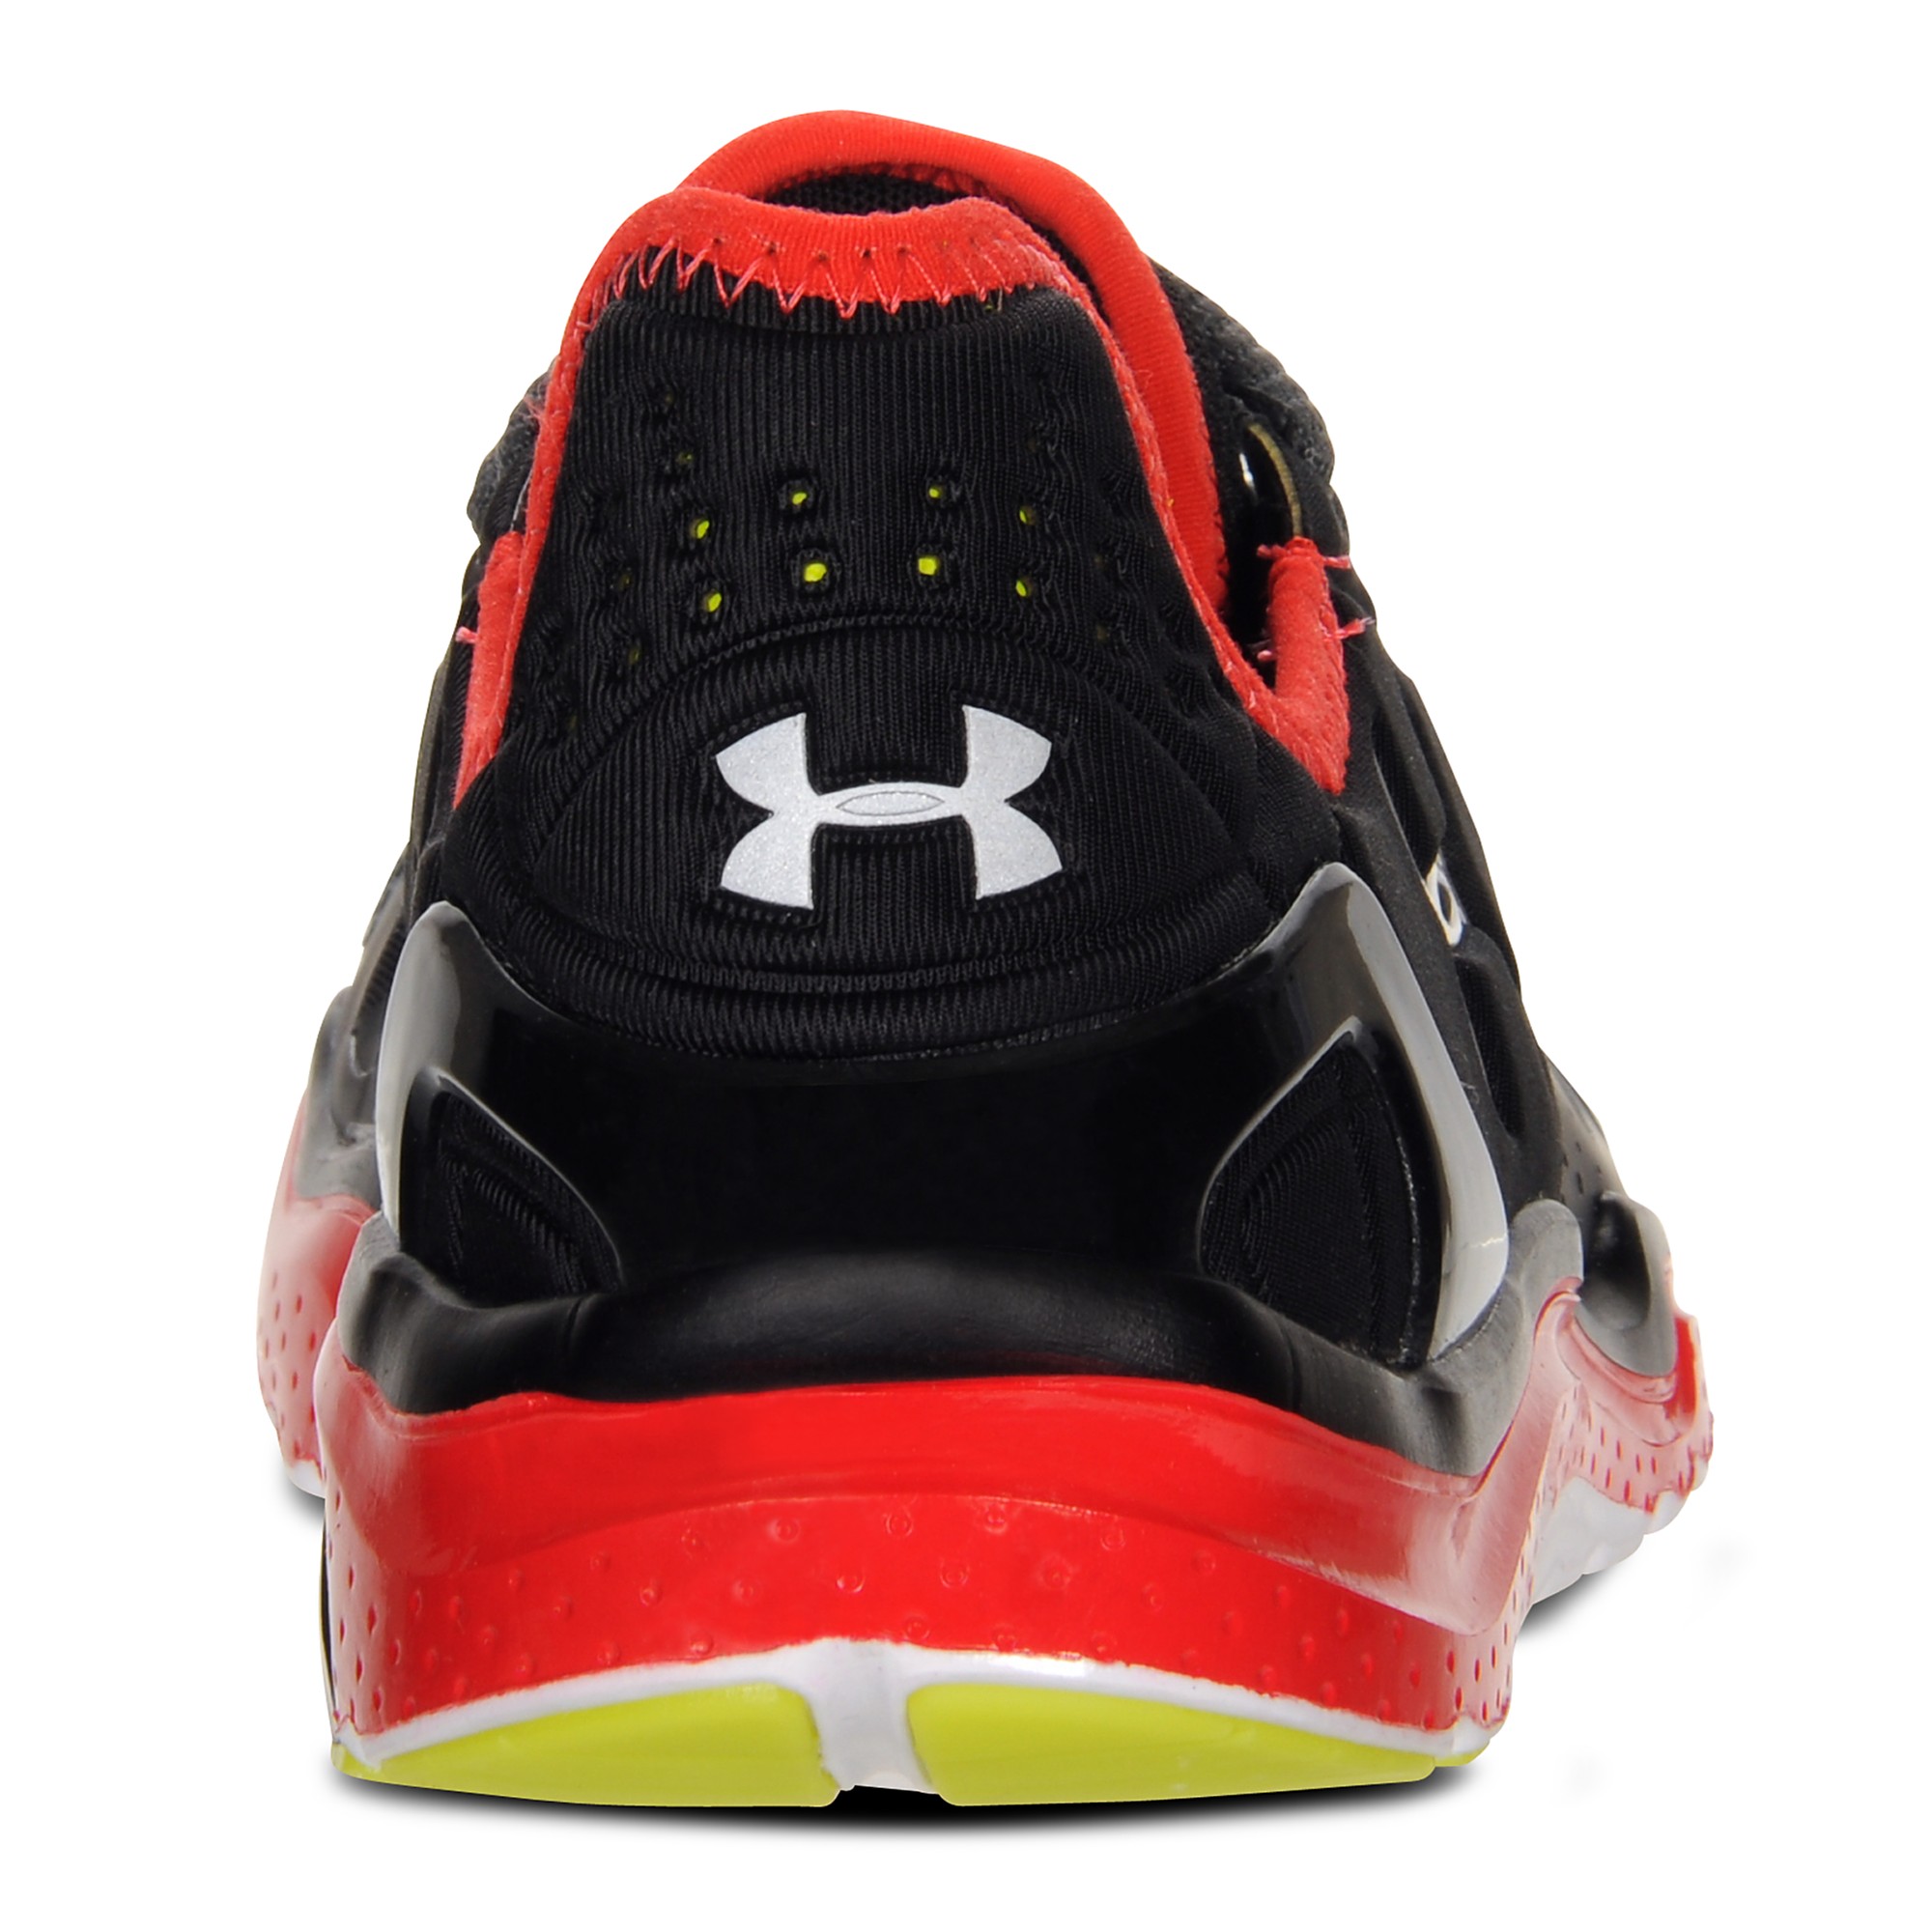 Under Armour Charge Rc 2 Running Sneakers in Black/Red/White (Black ...